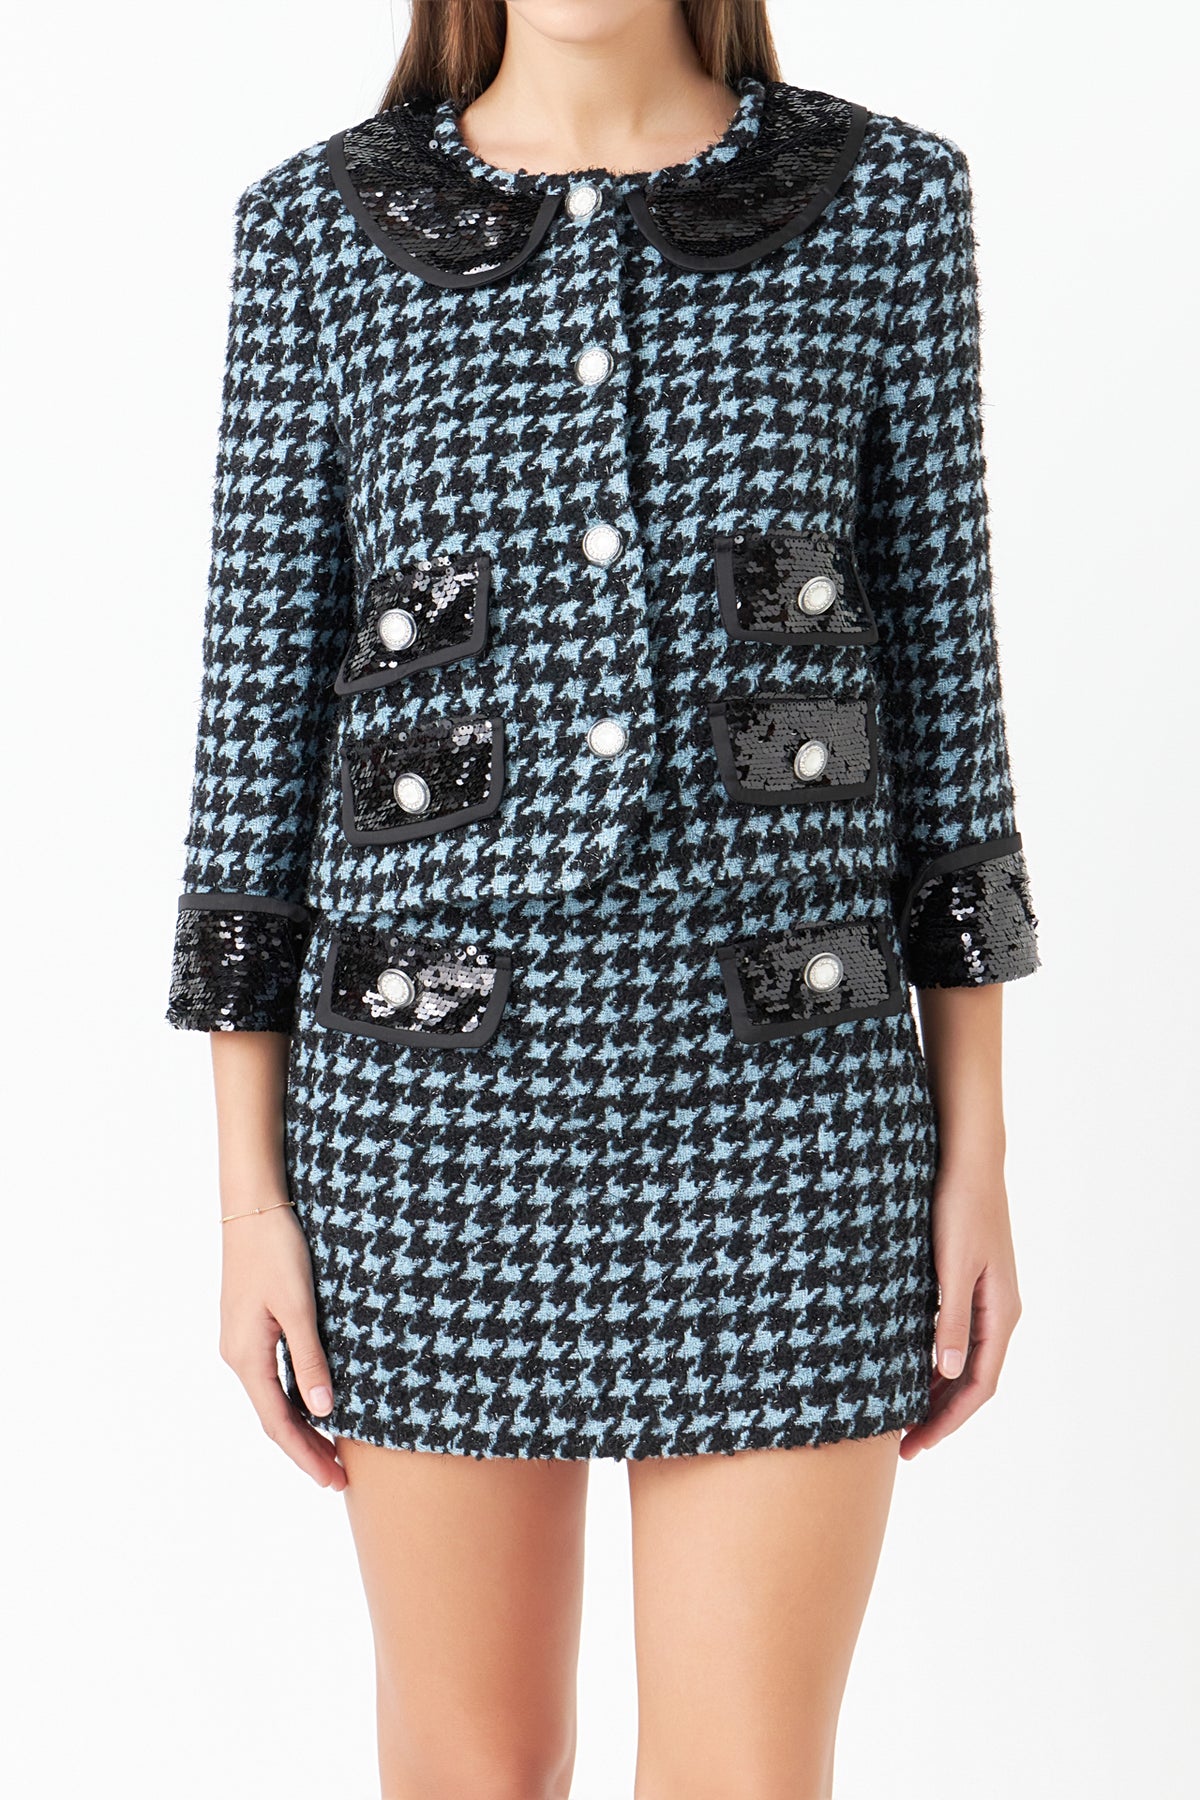 ENDLESS ROSE - Premium Houndstooth Cropped Jacket - JACKETS available at Objectrare